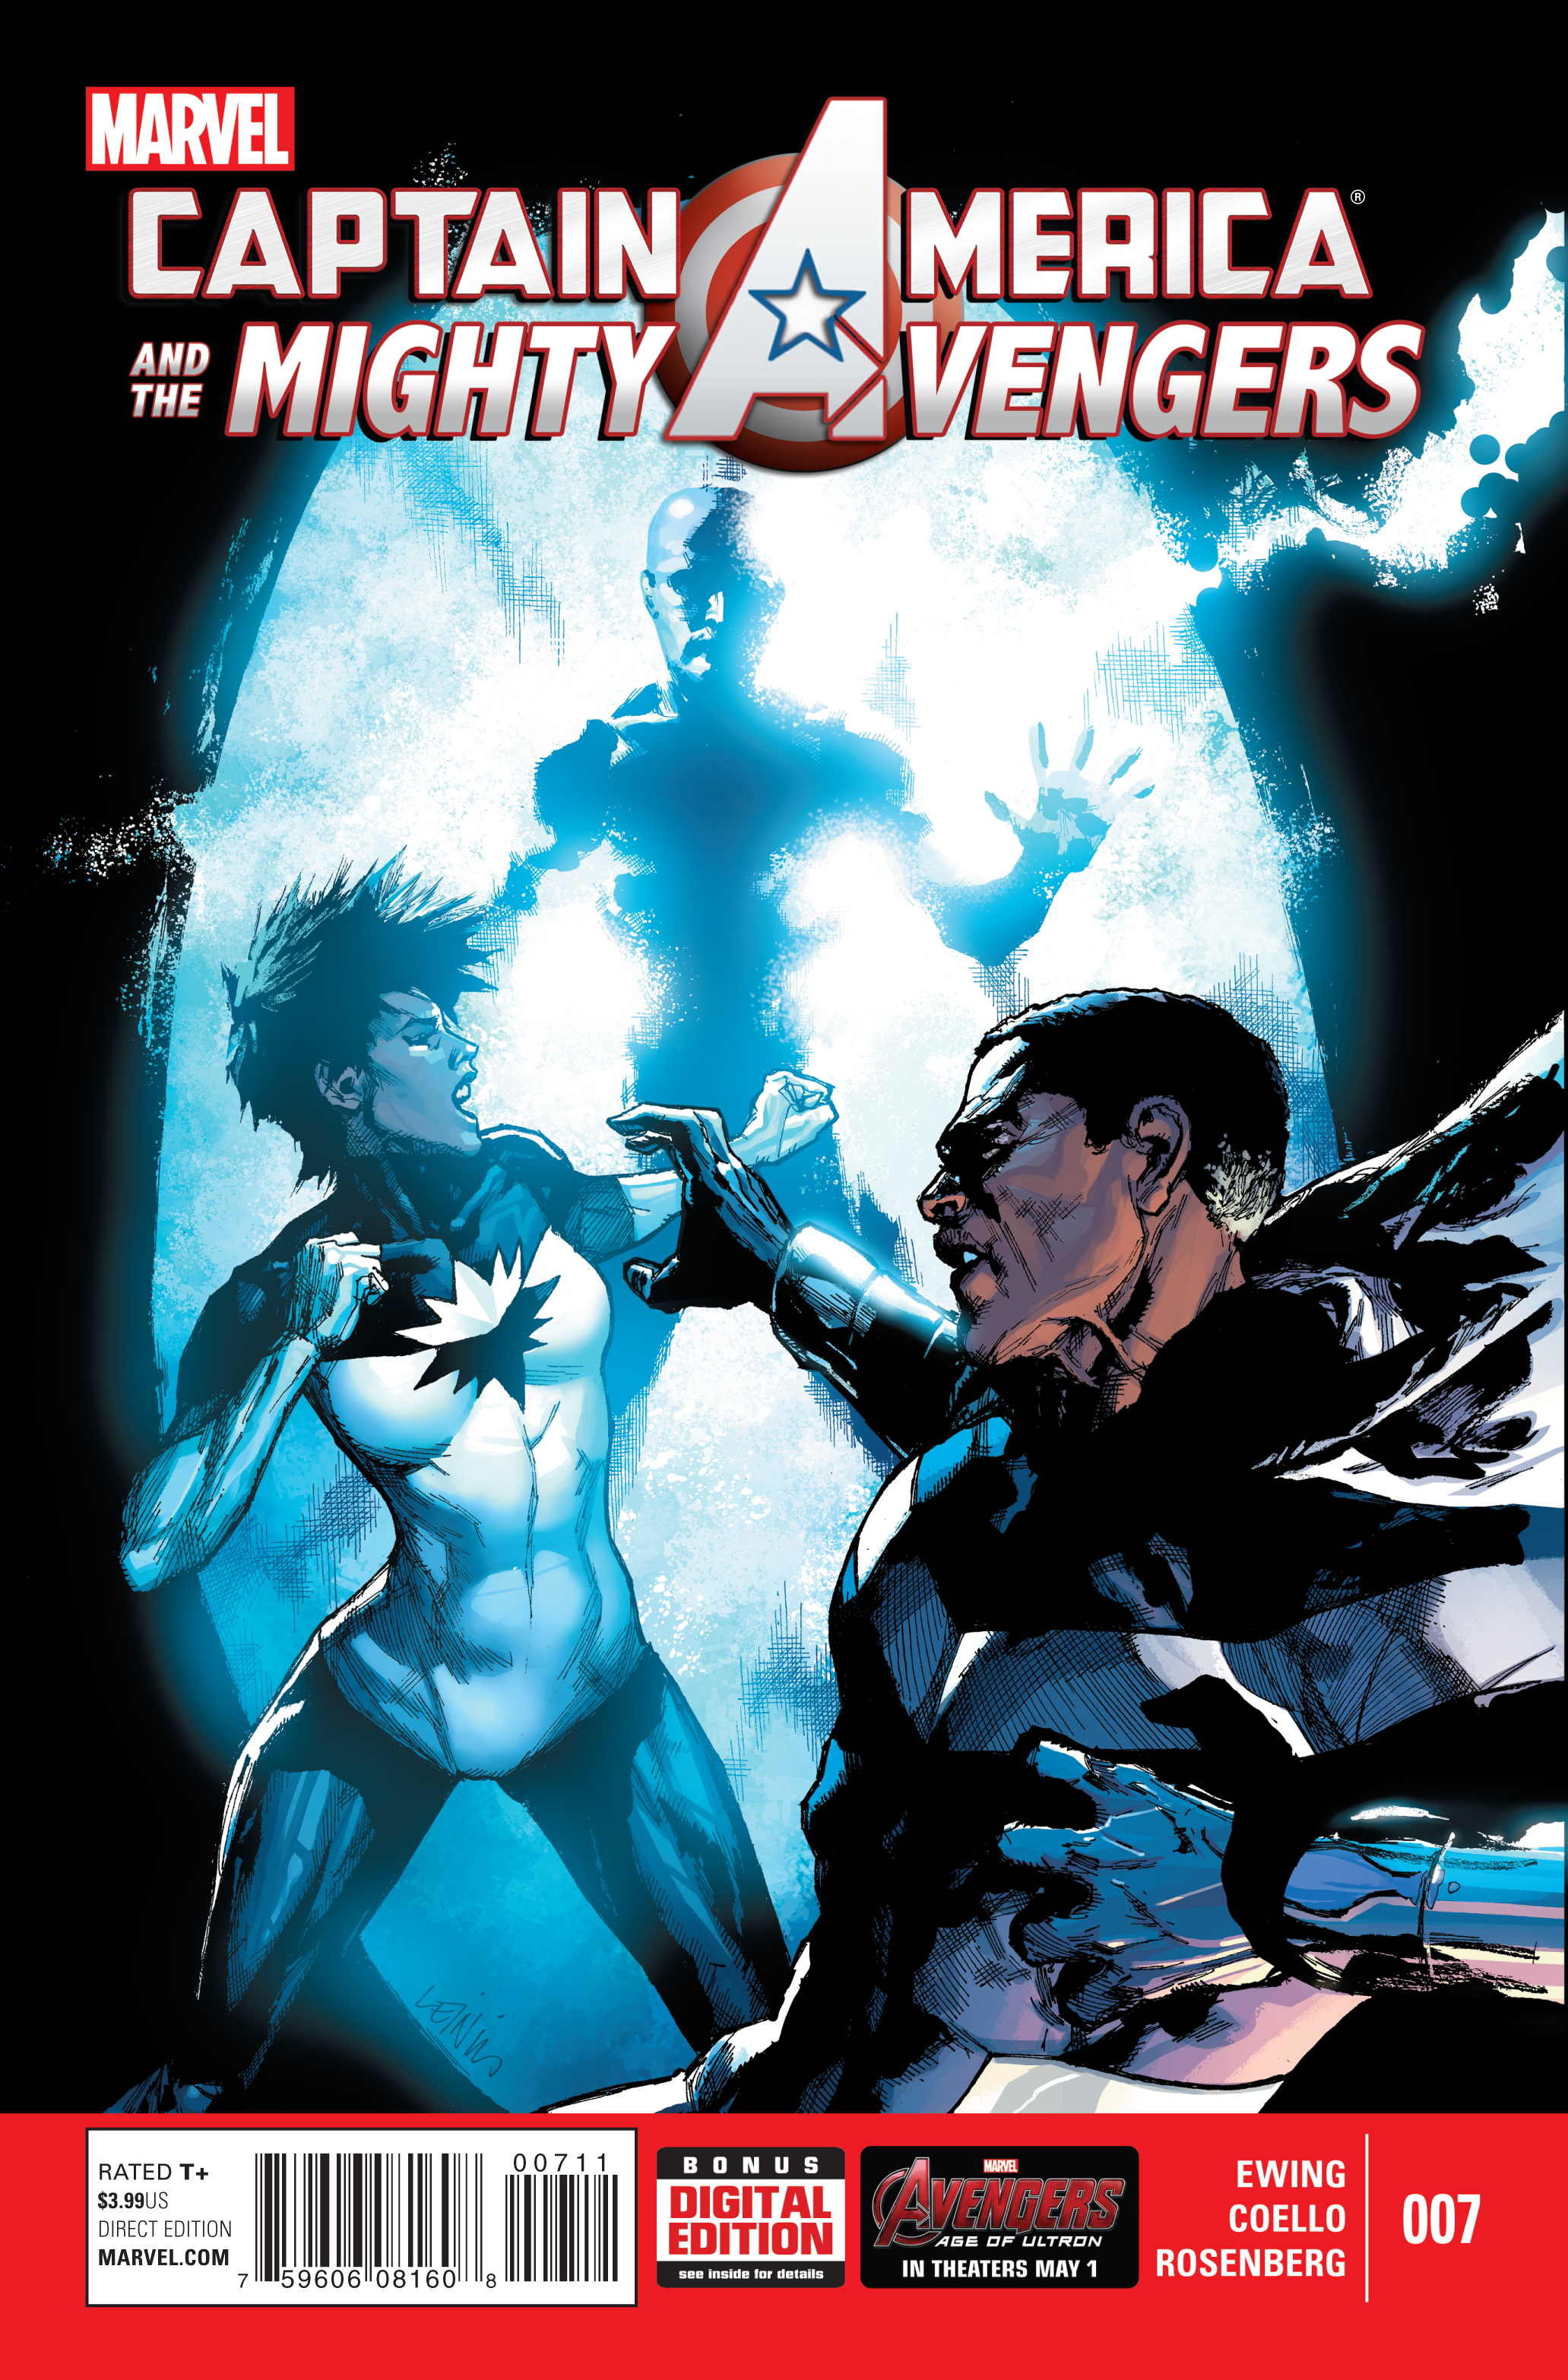 CAPTAIN AMERICA AND MIGHTY AVENGERS #7